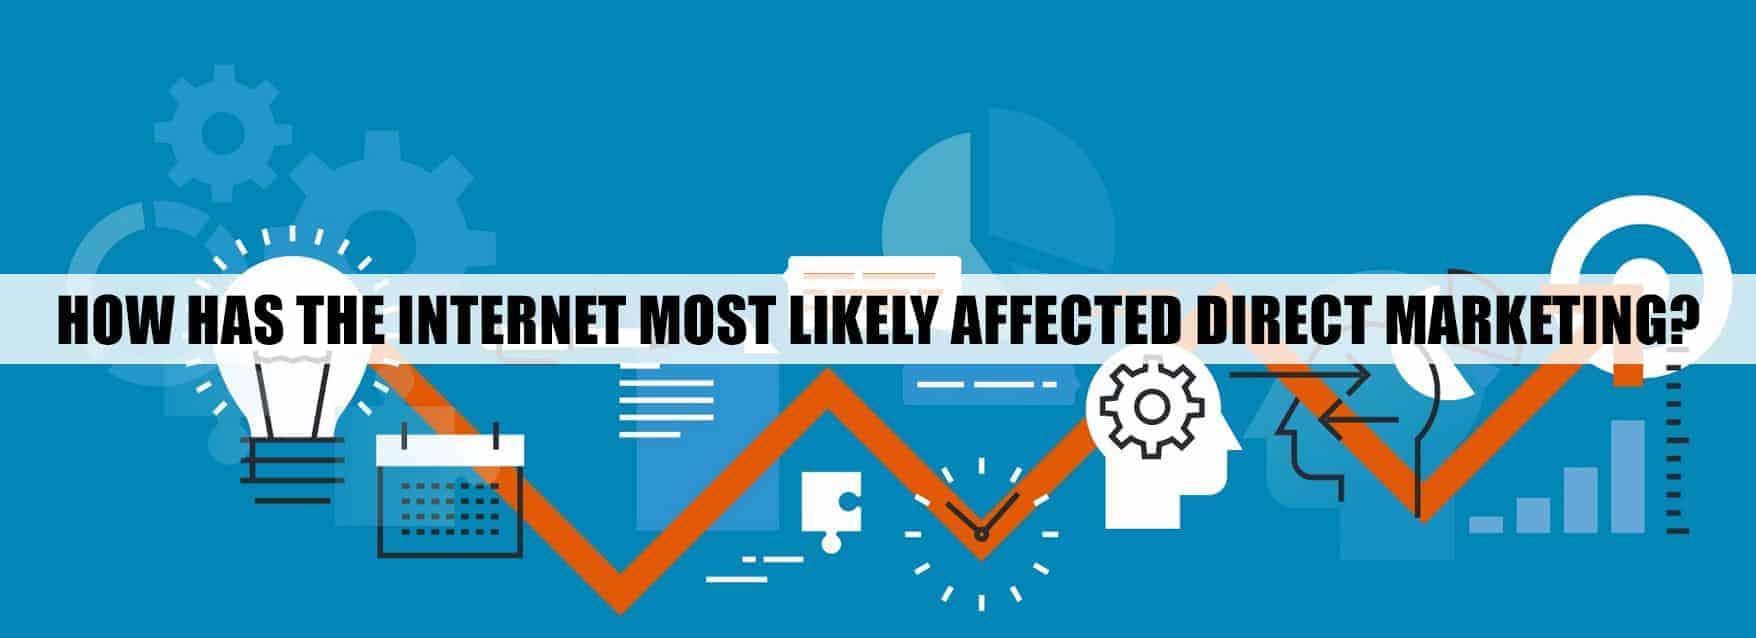 How Has The Internet Most Likely Affected Direct Marketing?